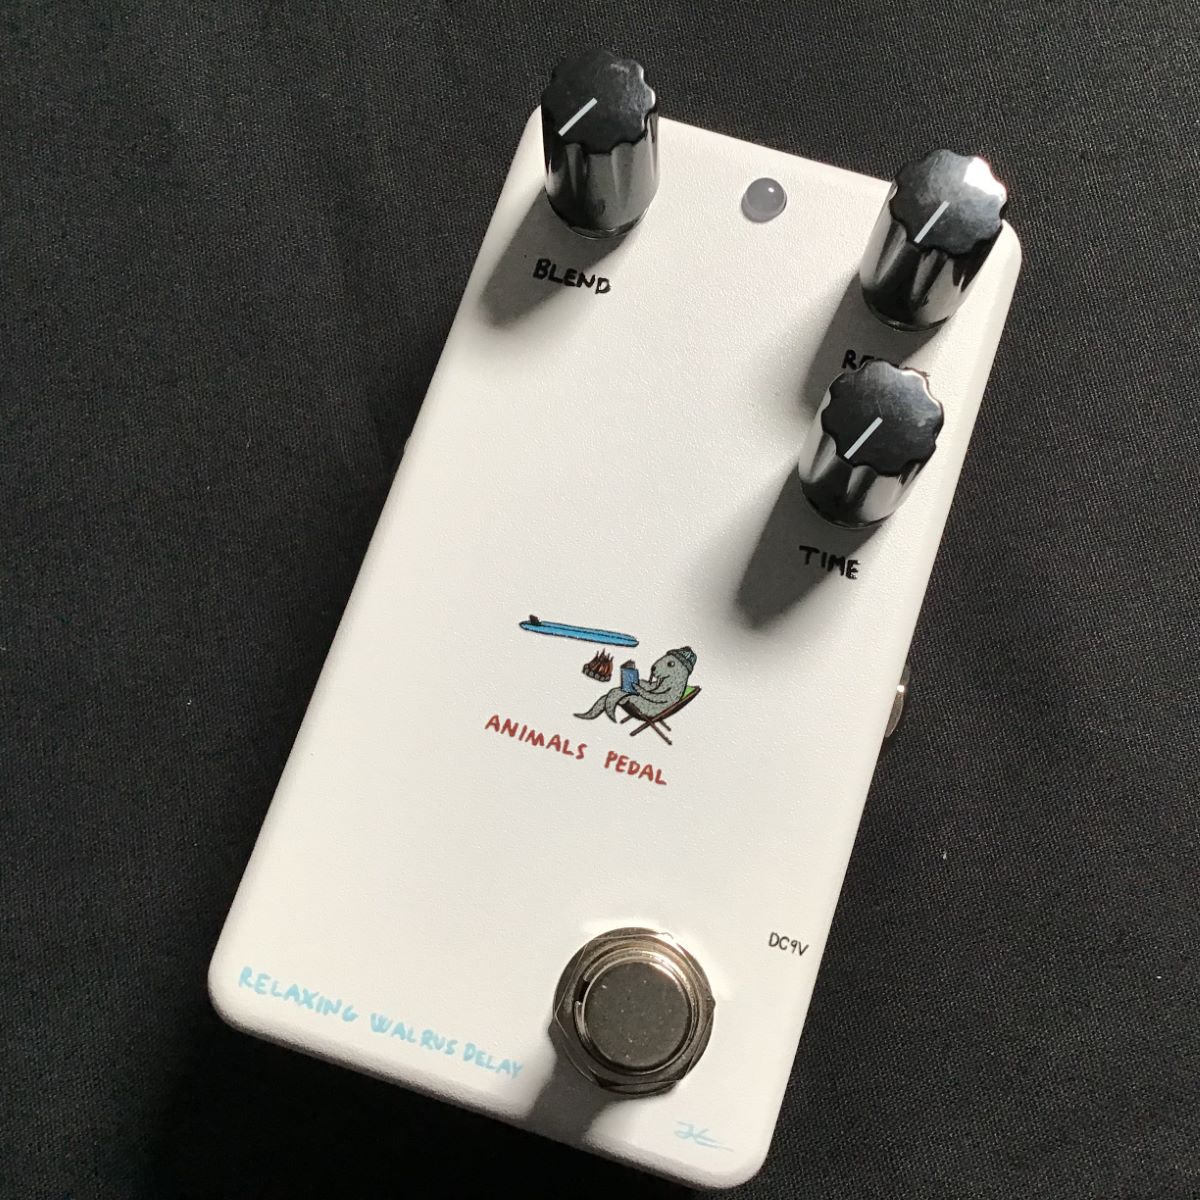 ANIMALS PEDAL RELAXING WALRUS DELAY コンパクトエフェクター